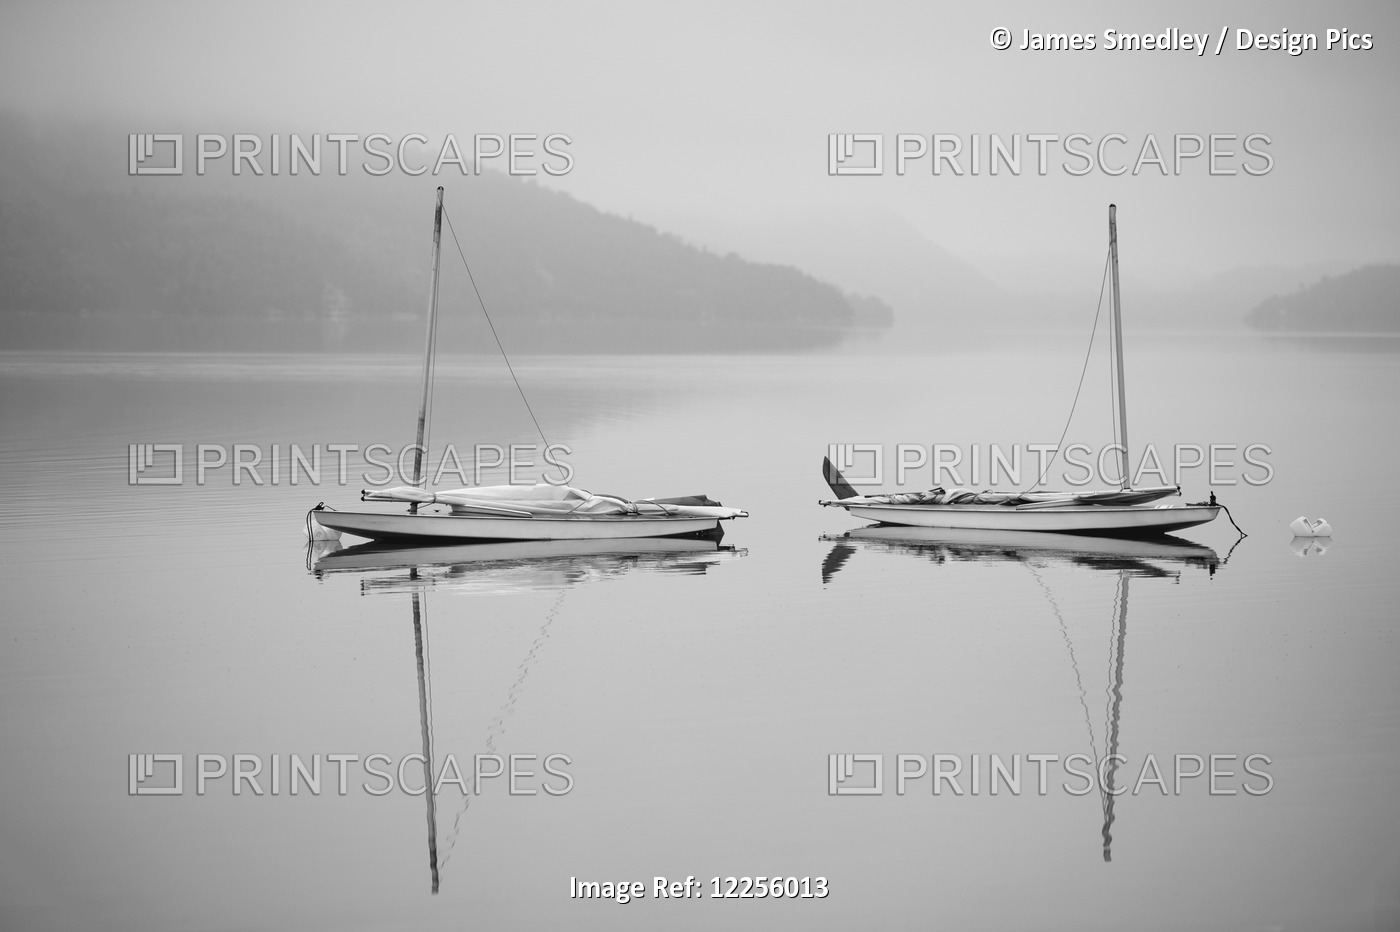 Two Sailboats Reflected In A Calm, Misty Lake; Ontario, Canada